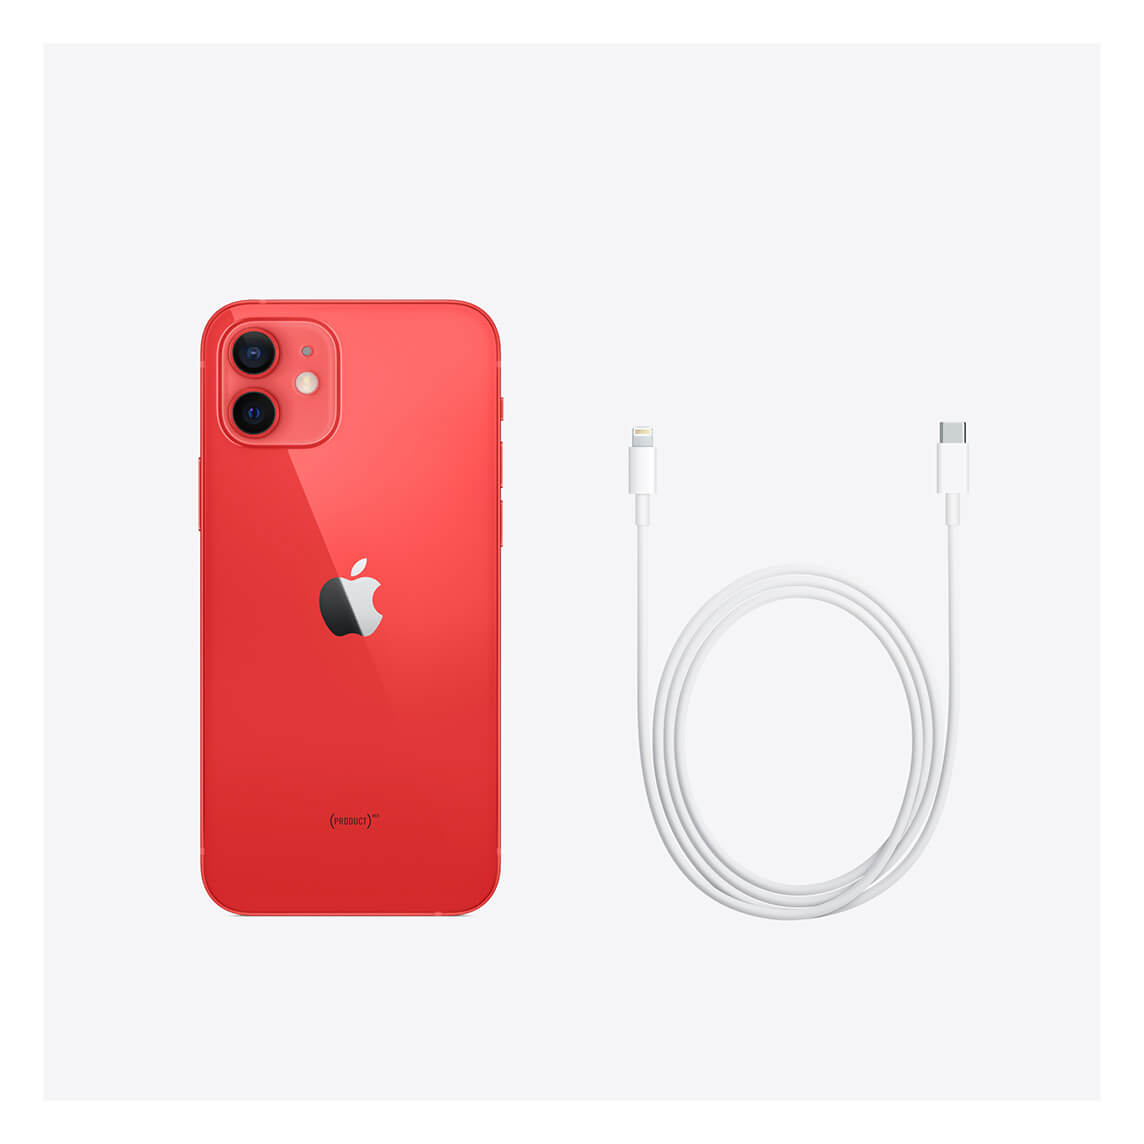 iPhone 12 (PRODUCT)RED - zestaw